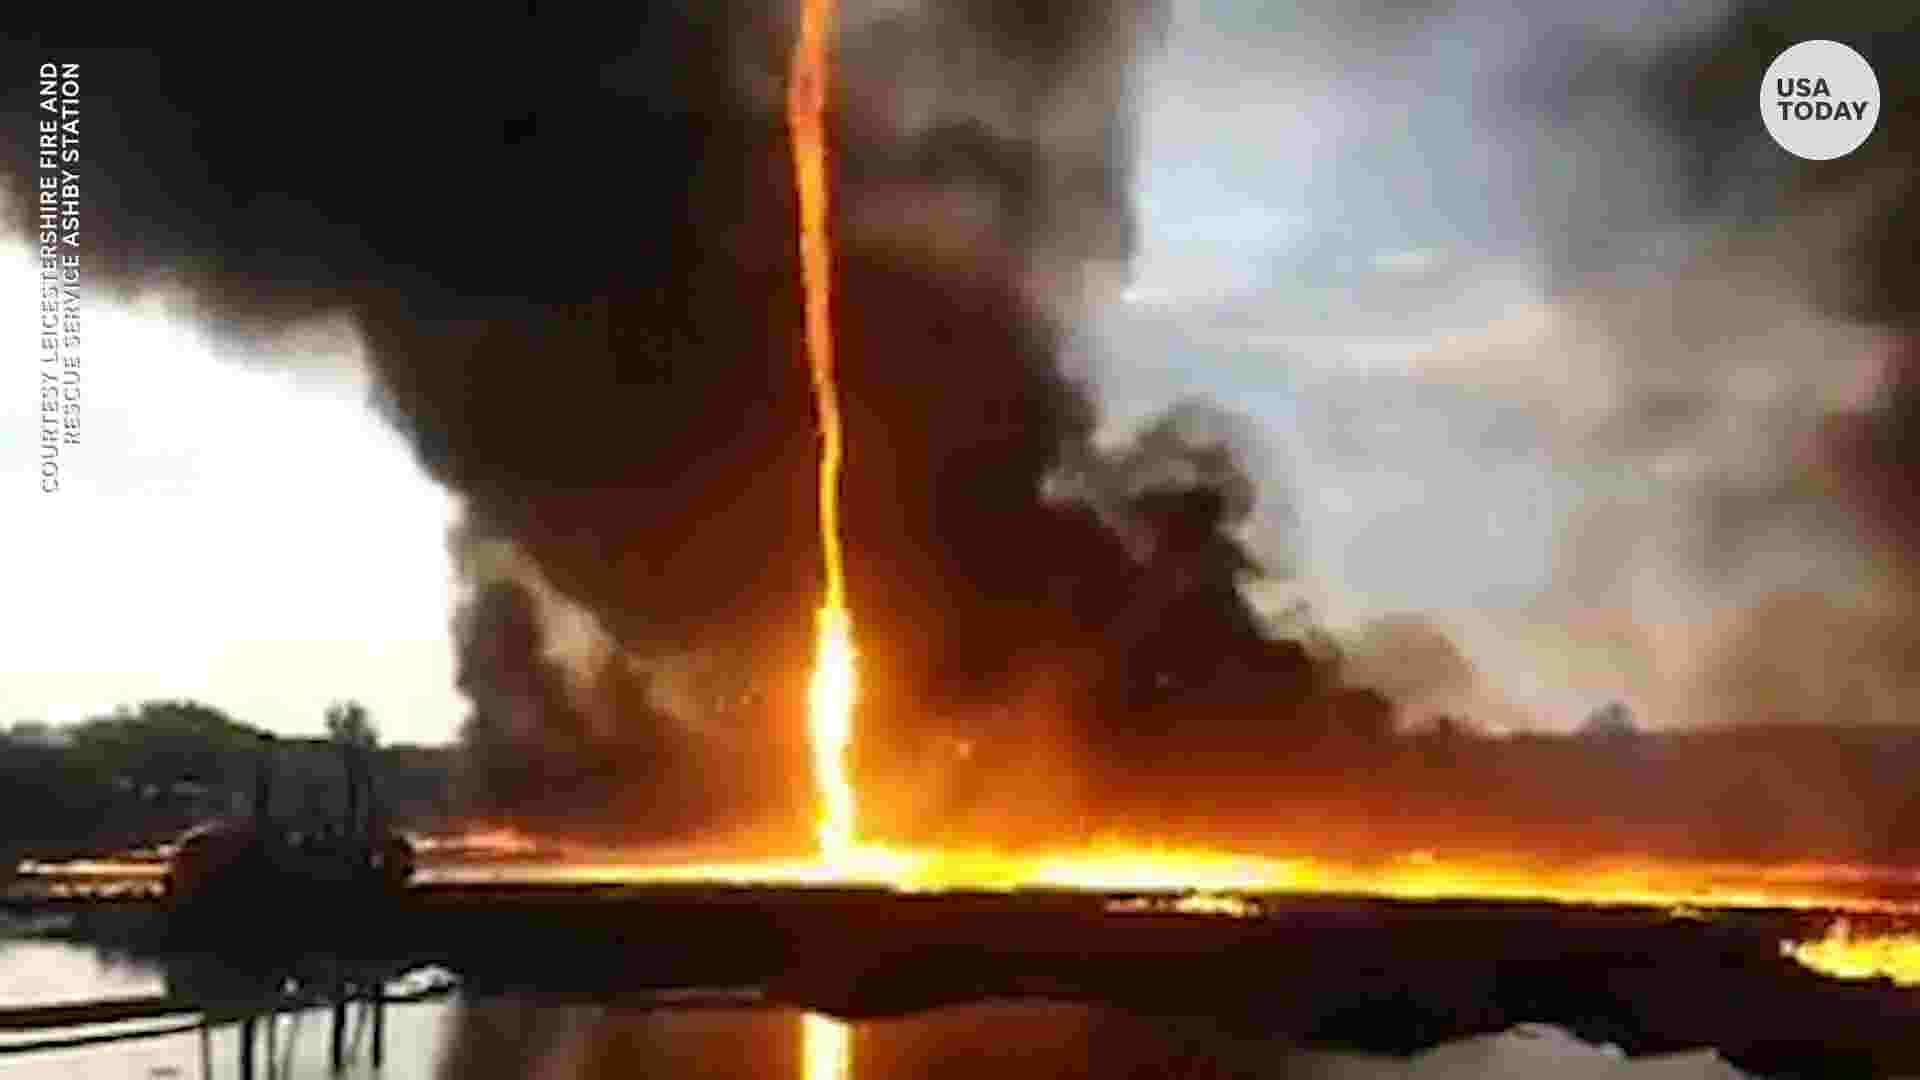 'firenado' whirls from ground into smoky cloud